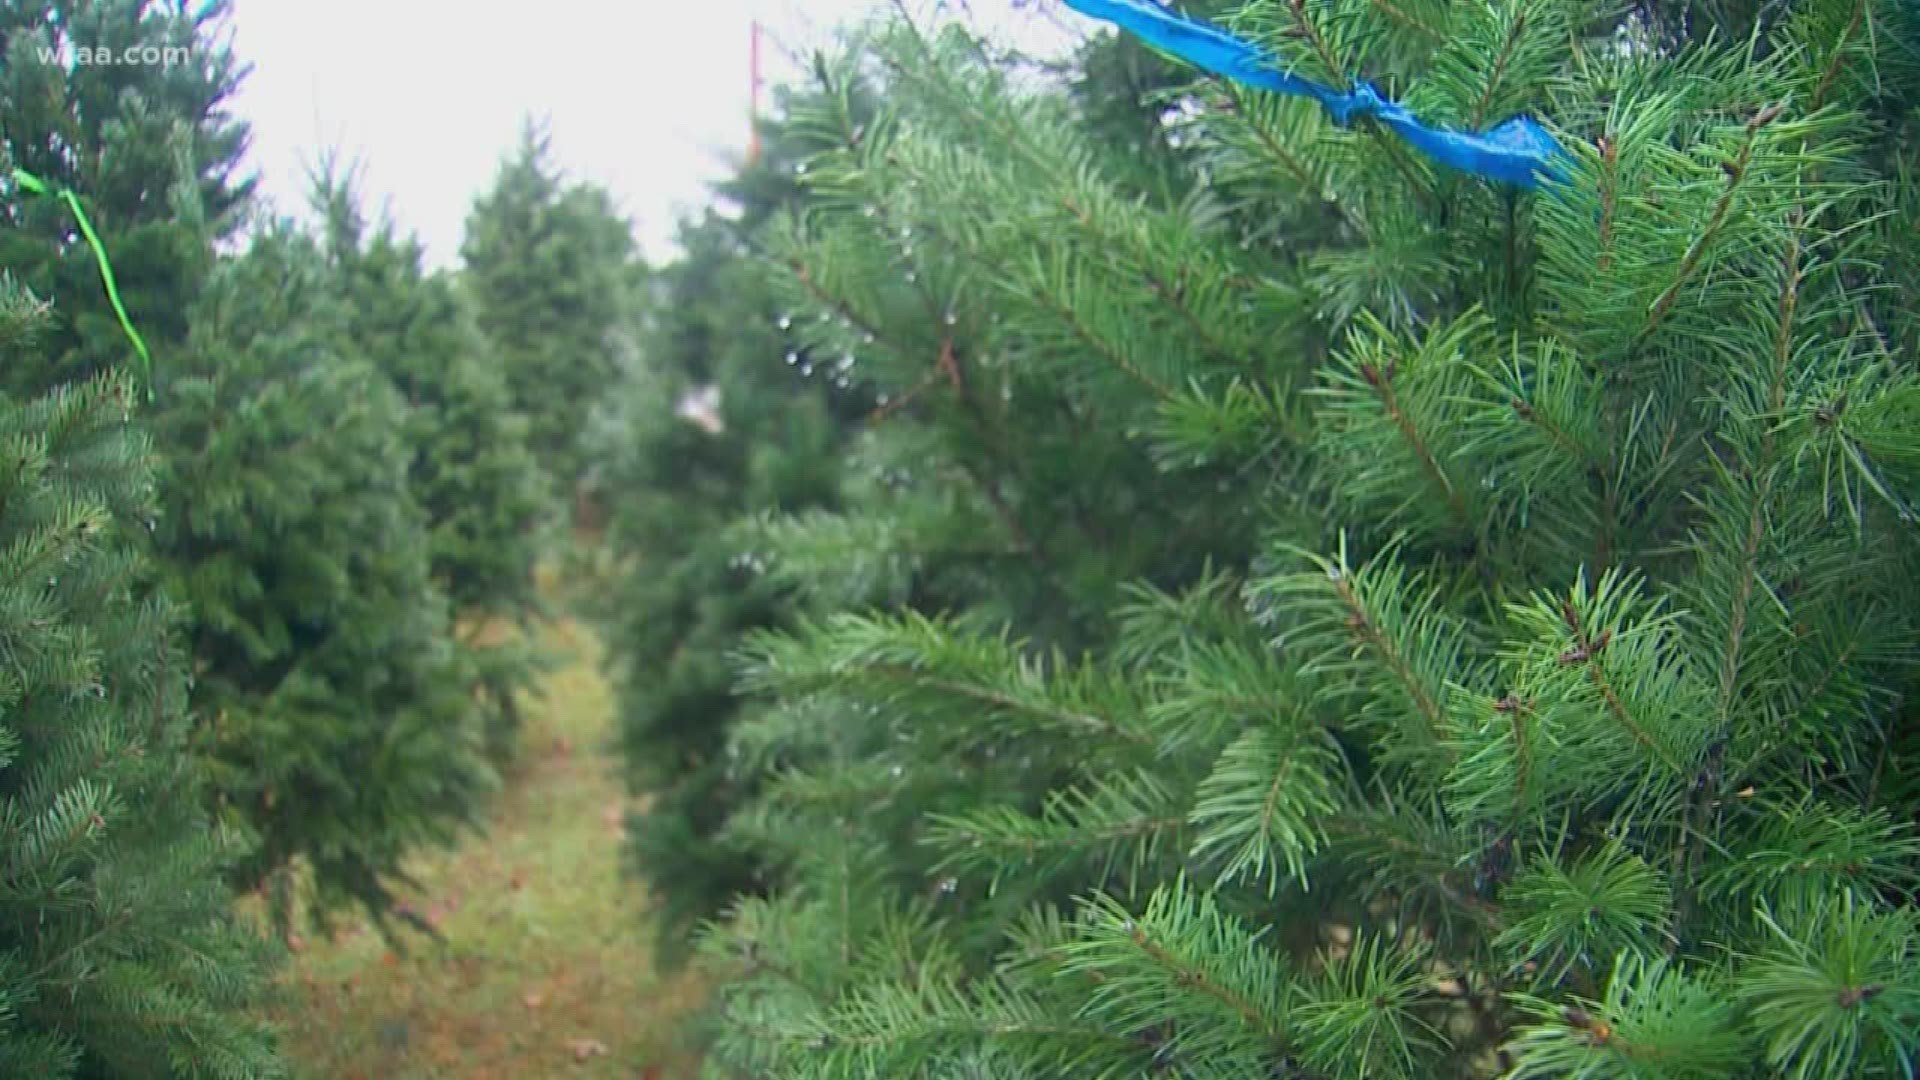 Optimist Club of Fort Worth started its annual selling of Christmas trees on Friday. They said they expect to sell 1,000 Christmas trees from Black Friday to Dec. 2